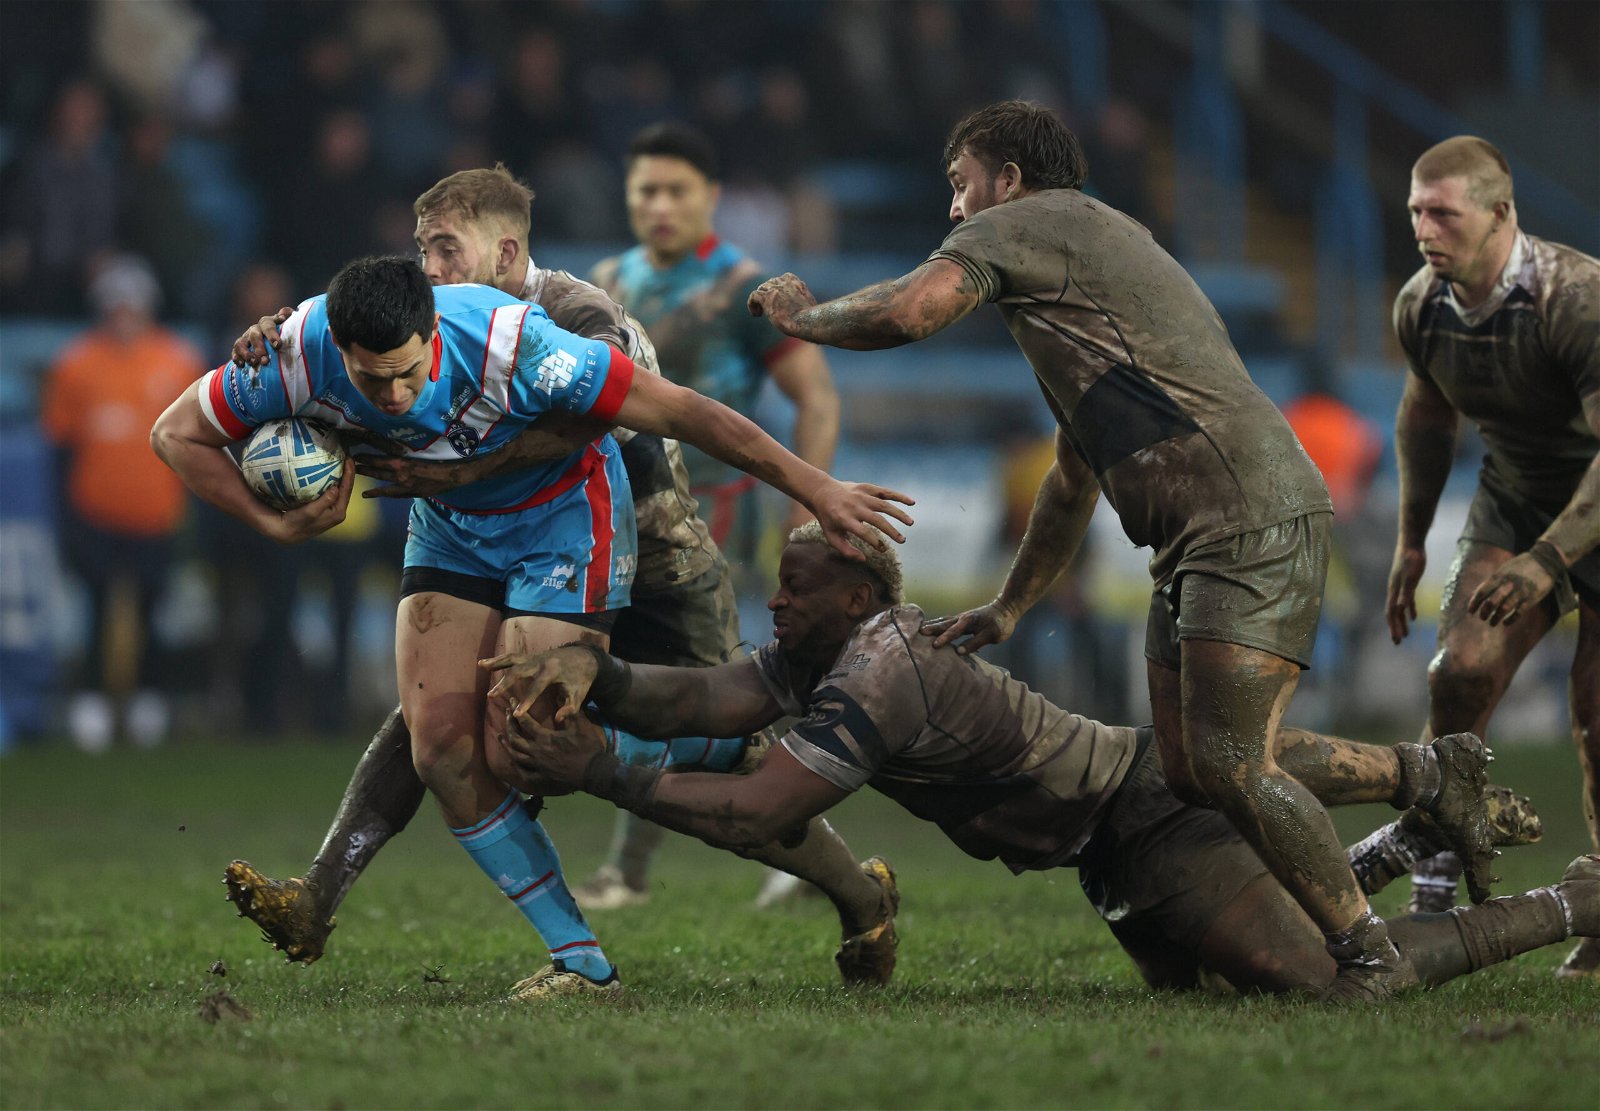 Wakefield Trinity player Isaiah Vagana in action with Featherstone Rovers' Gadwin Springer. They are covered in mud from head to toe.